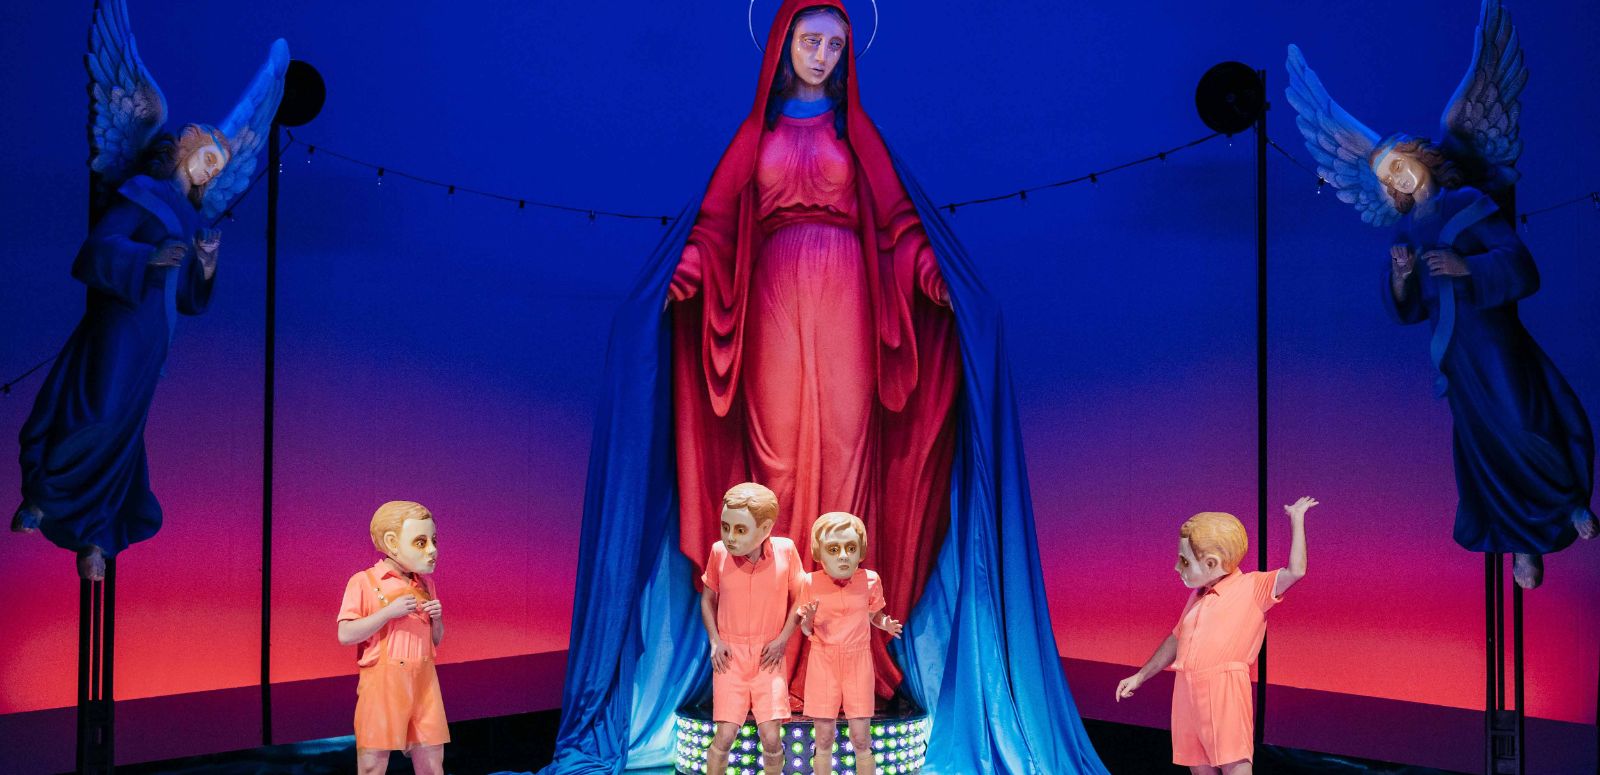 Four people in salmon pink costumes and with a mask over their heads stand in front of a huge statue of the Virgin Mary flanked by two angels.